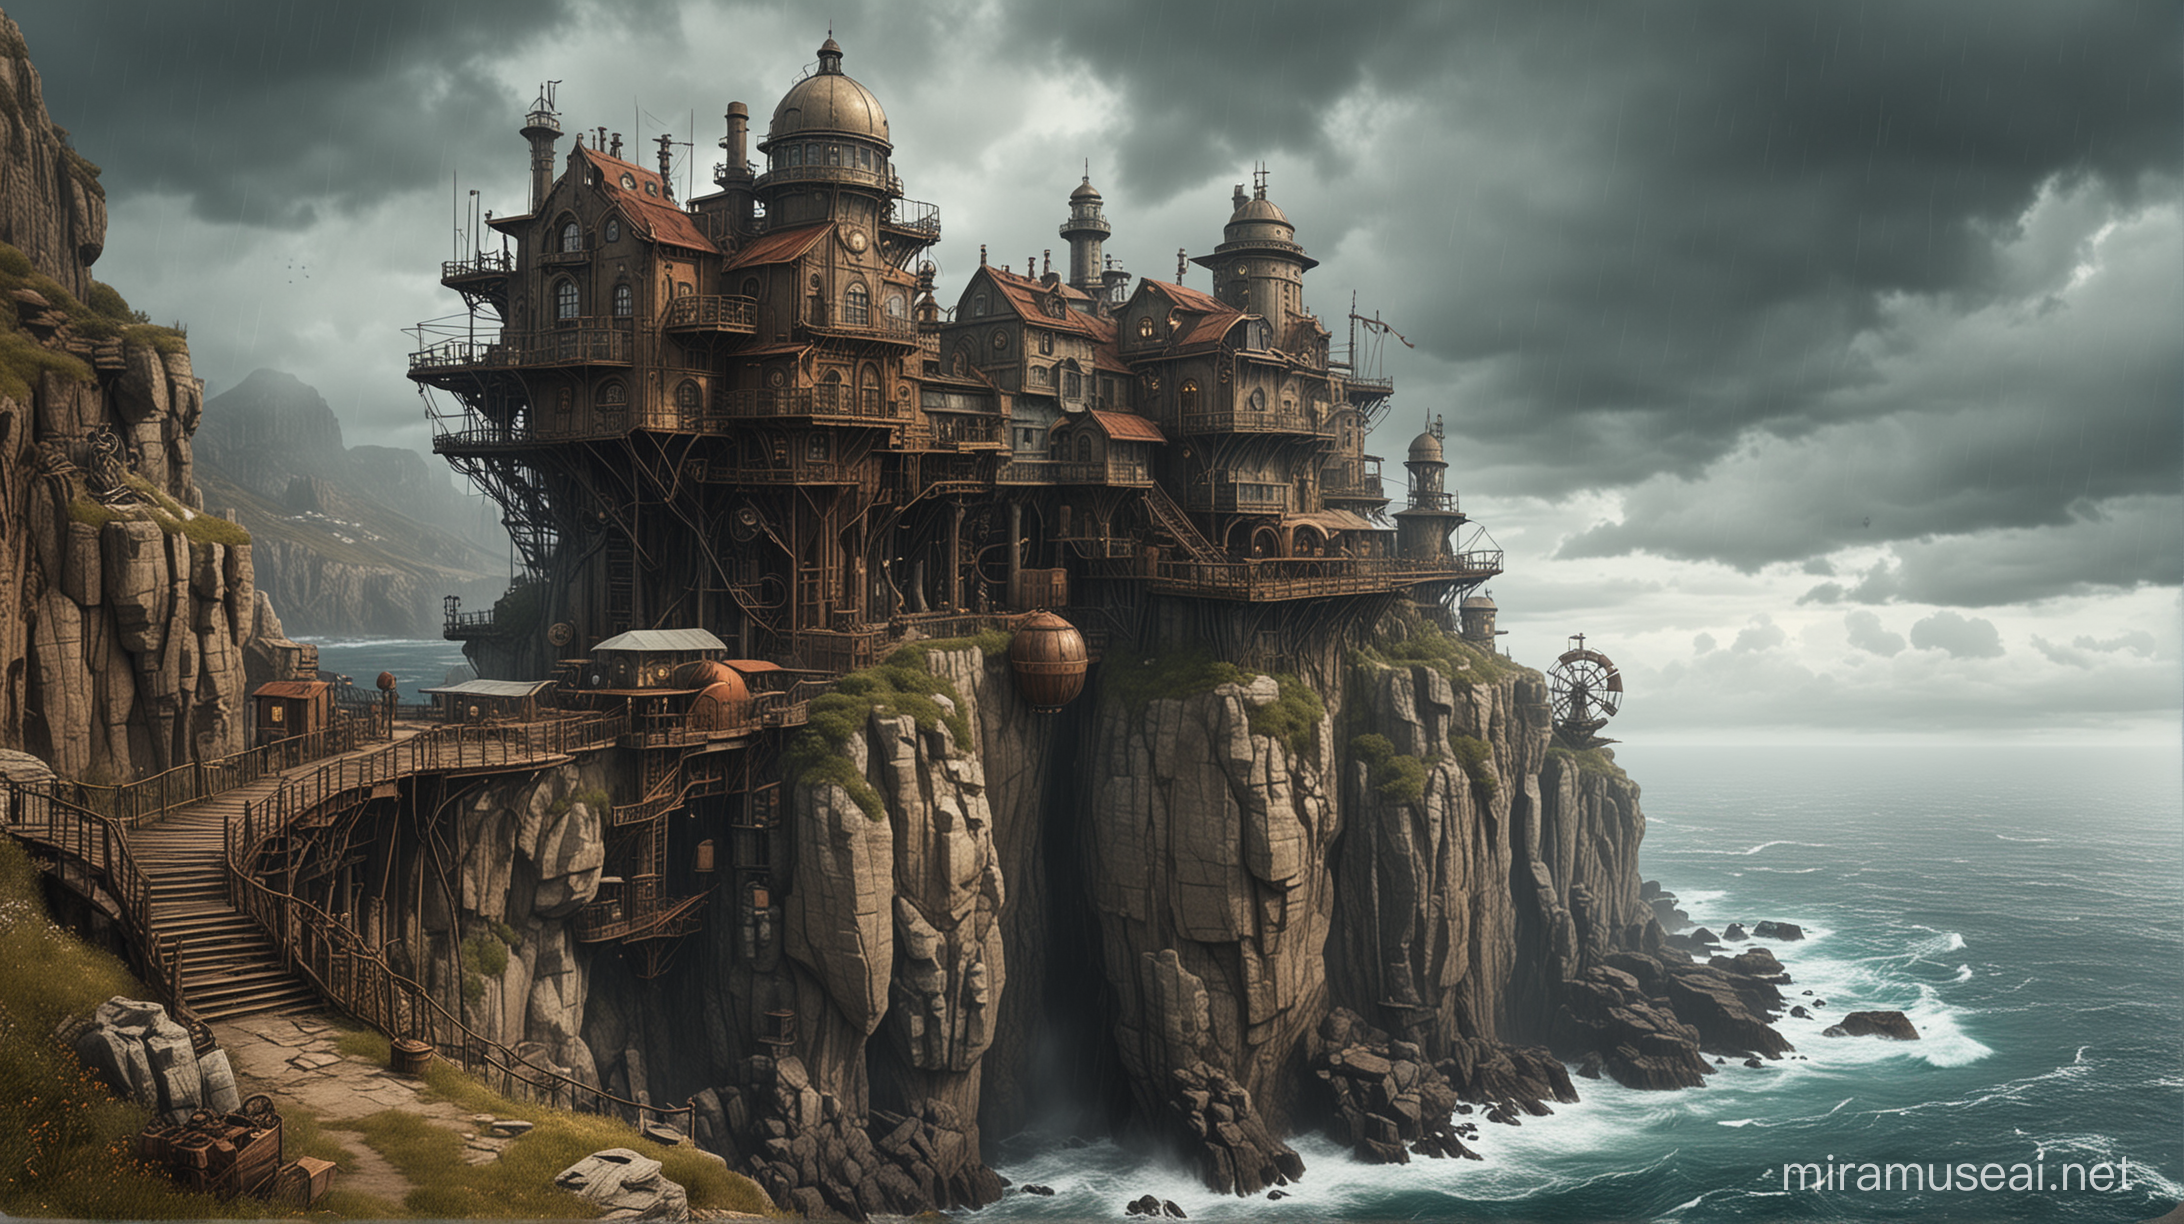 Steampunk Colony on High Cliff by Troubled Sea Under Cloudy Sky